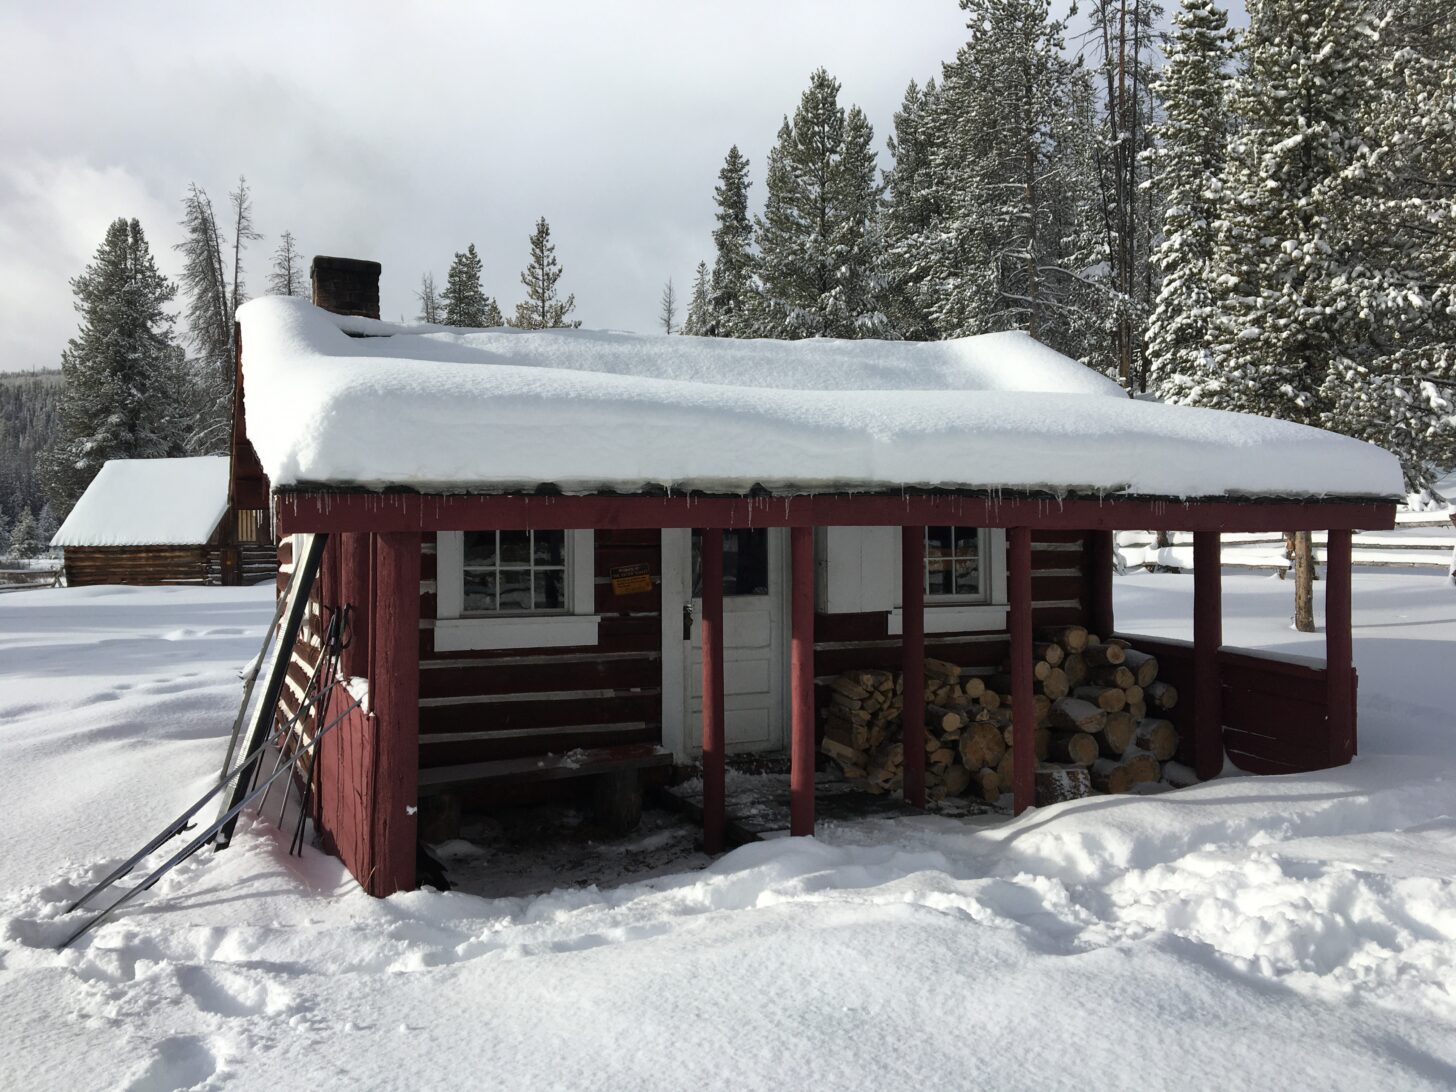 A cabin is pictured in a snowy landscape.